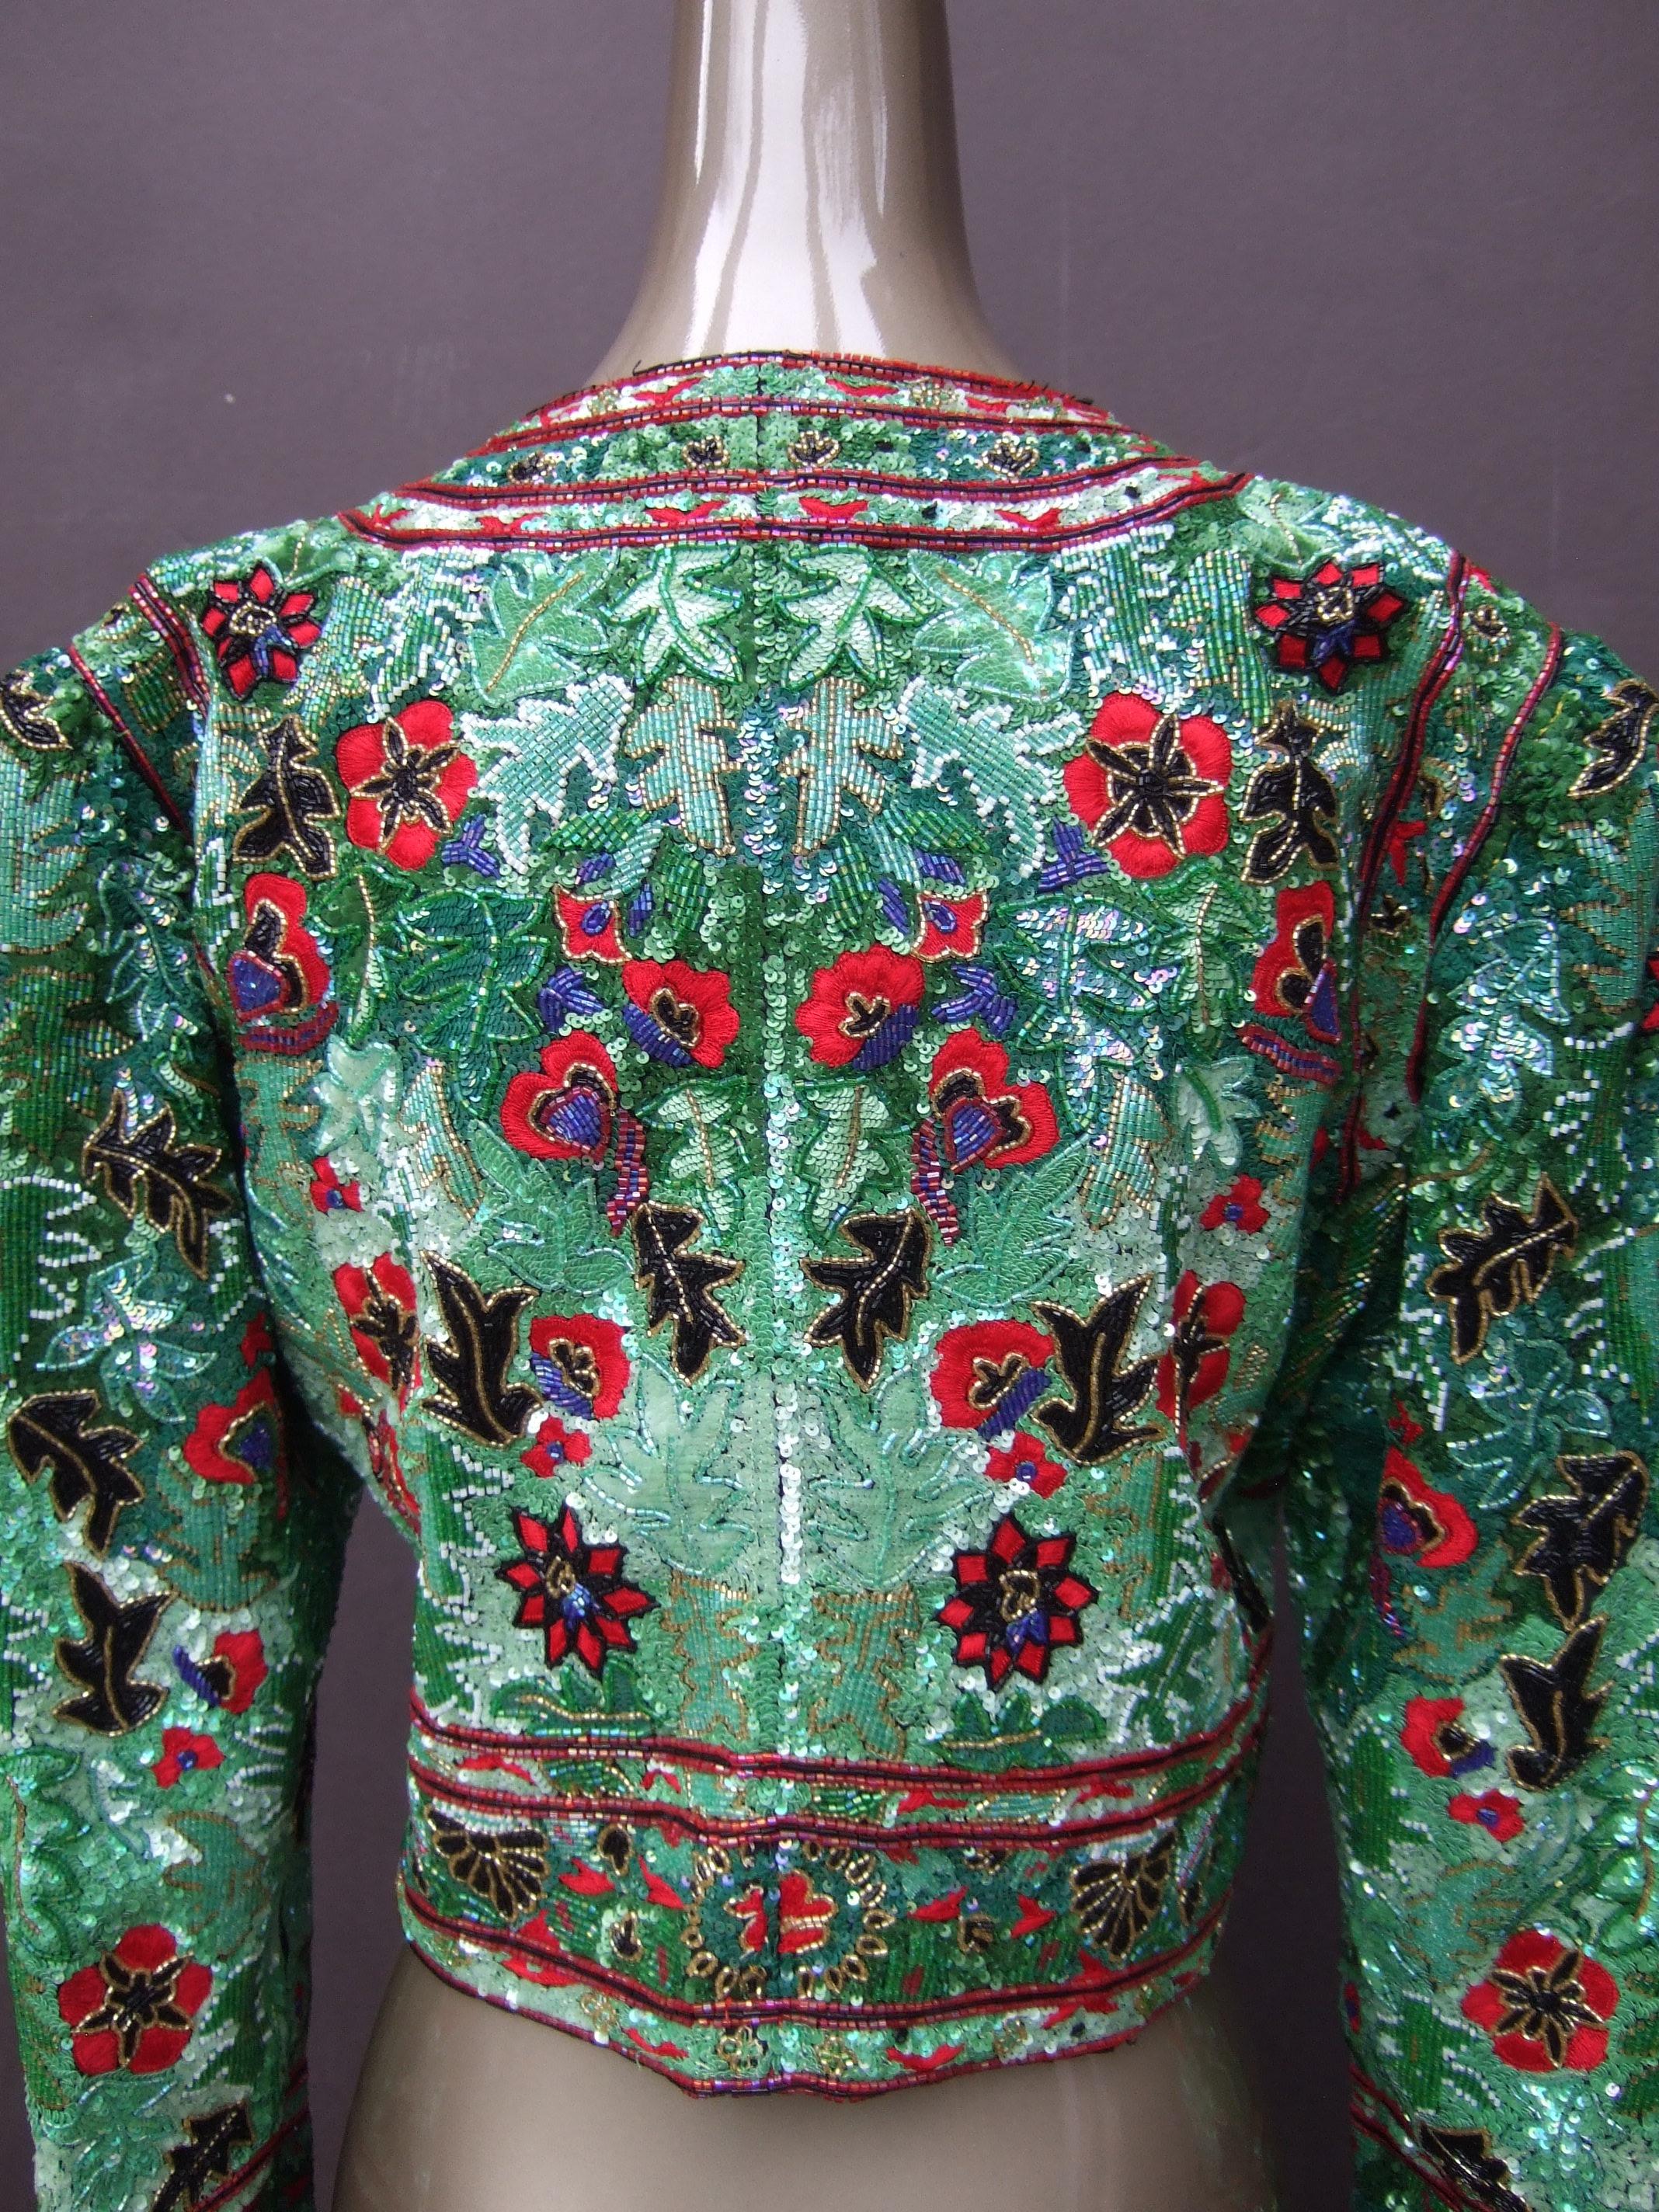 Exquisite Elaborate Glass Floral Beaded Embroidered Bolero Jacket c 1980s For Sale 2